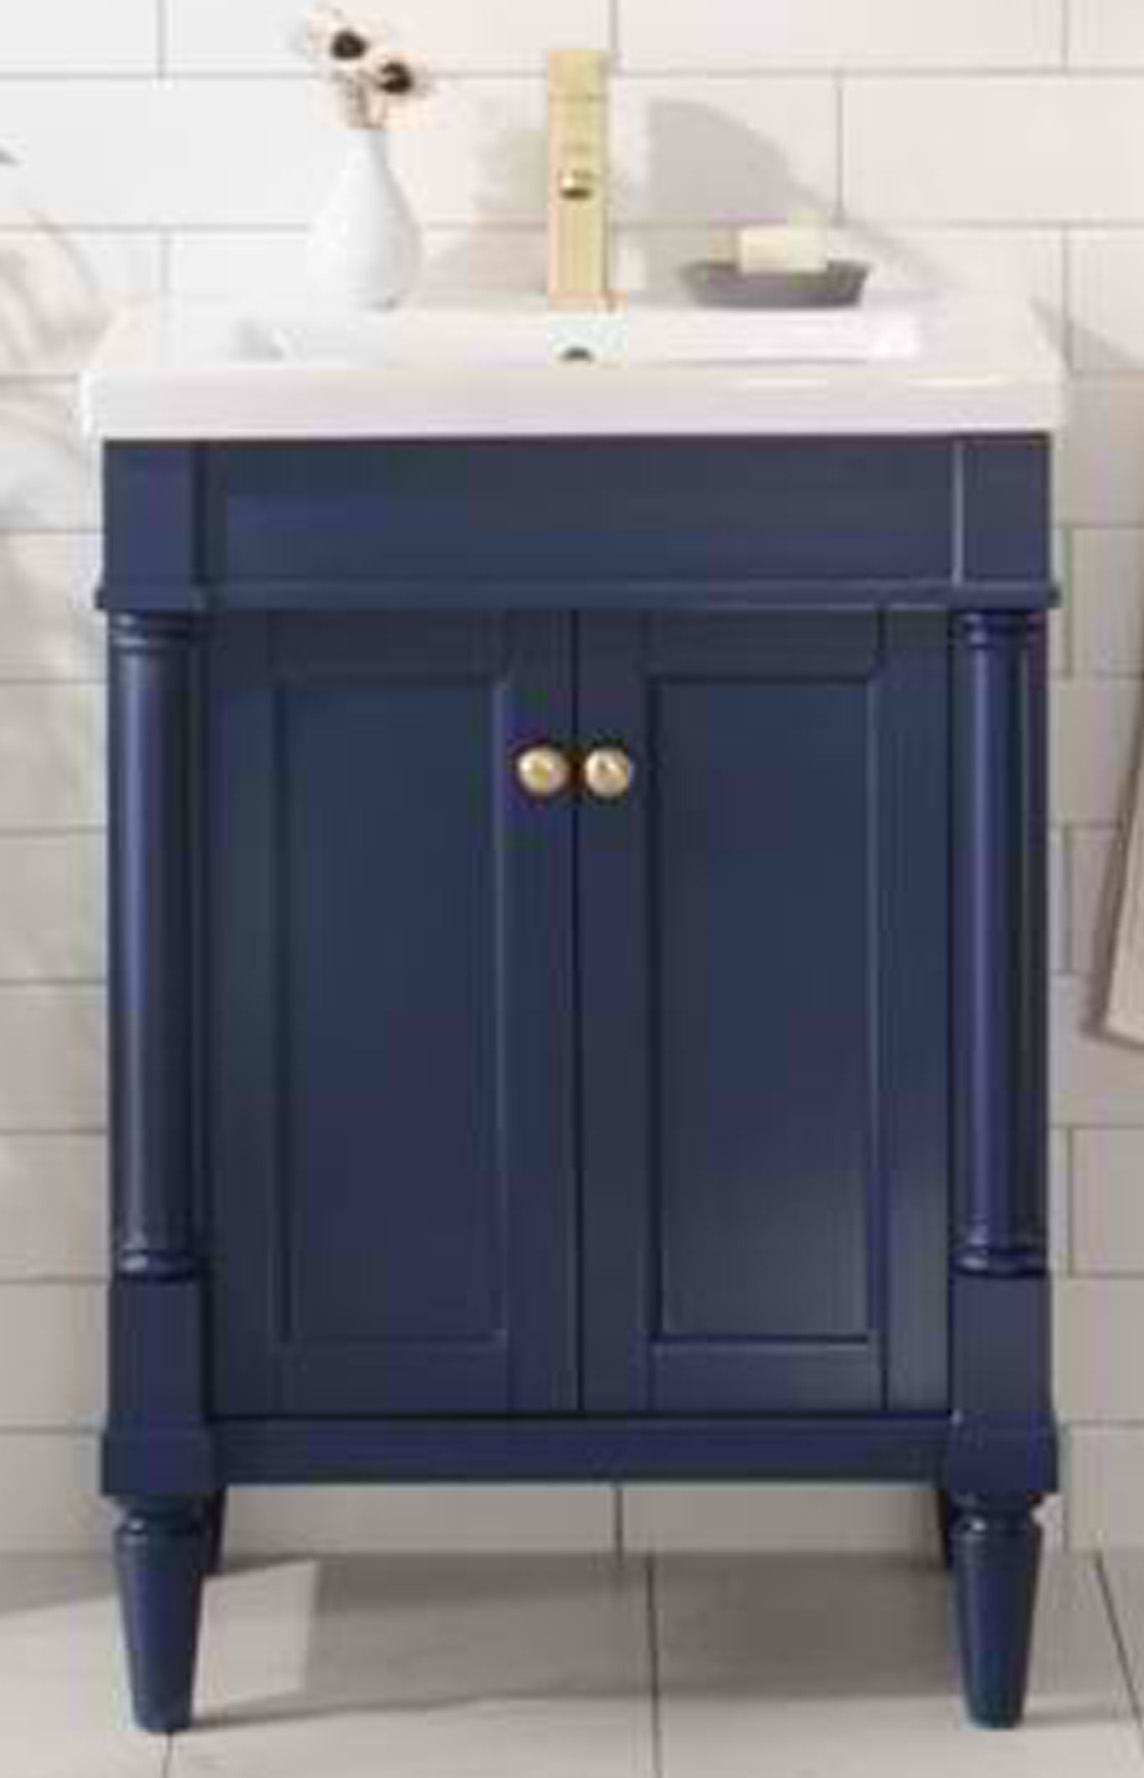 24" Single Sink Bathroom Vanity Blue Finish in Ceramic Top and White Ceramic Sink with Color Options